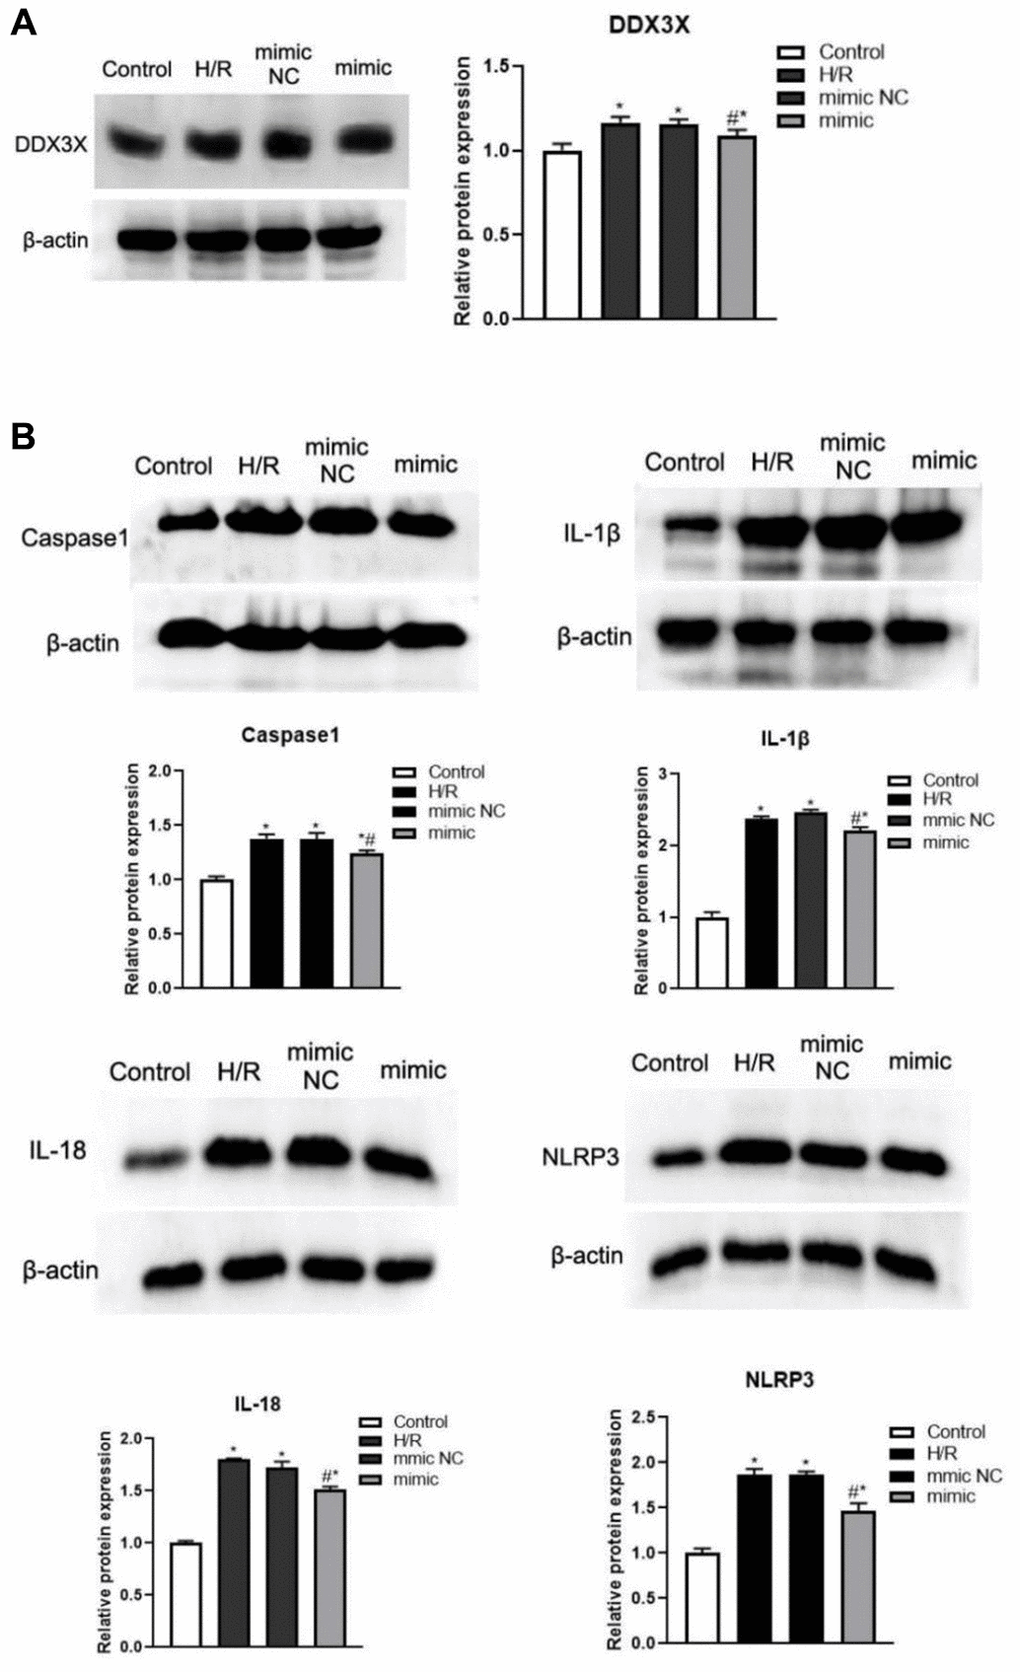 Changes of DDX3X and pyroptosis related factors in all HK2 groups. (A) Expression of DDX3X. (B) Expression of NLRP3, caspase-1, IL-1β, and IL-18 (*pp